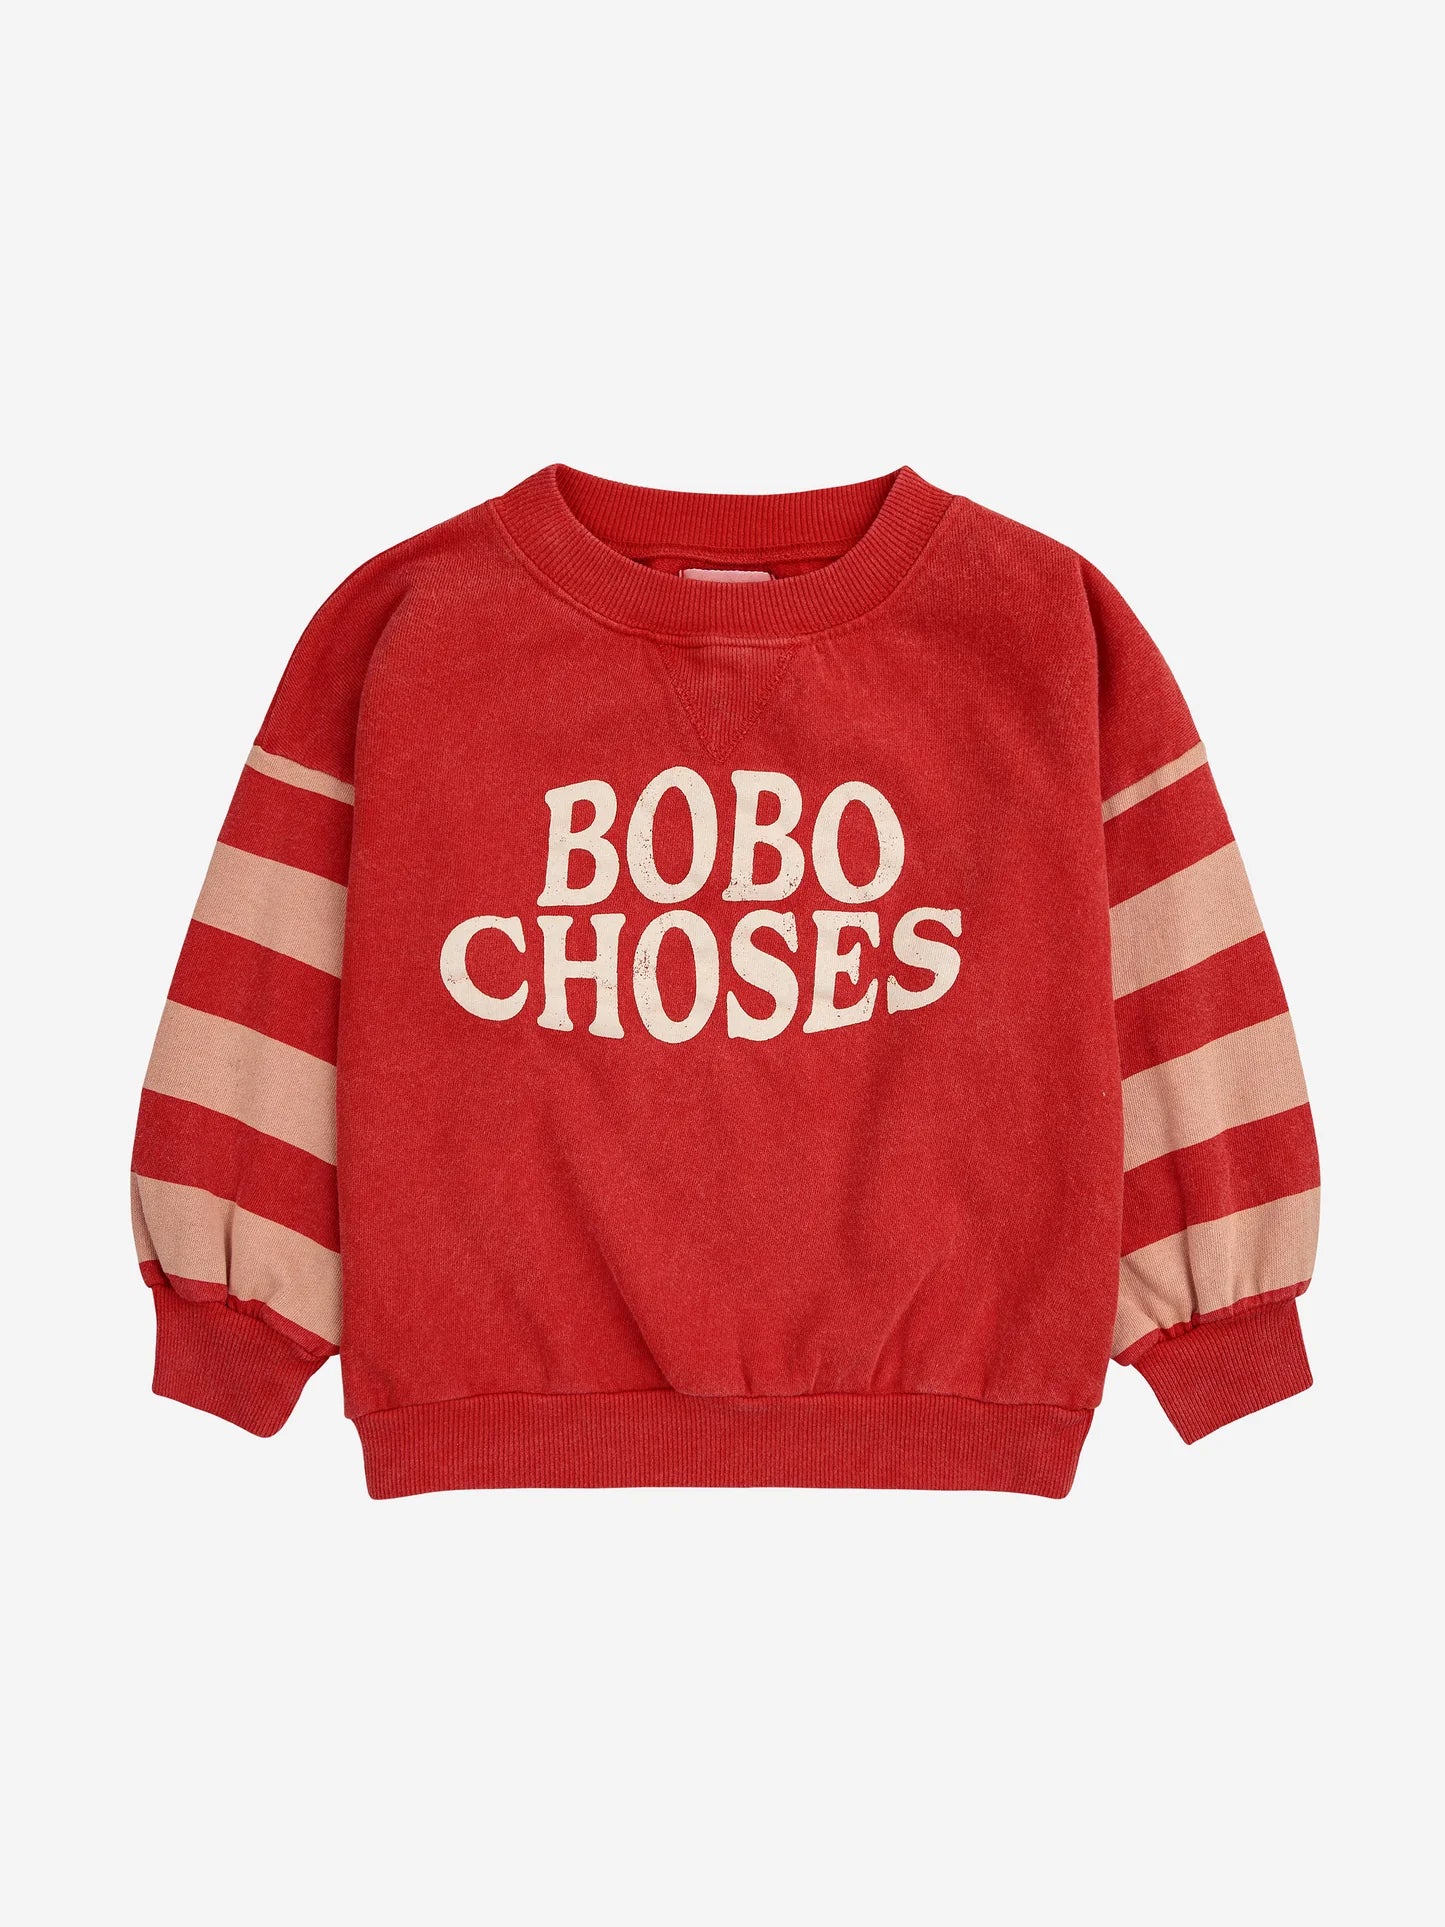 100% organic cotton red sweatshirt with striped sleeves & Bobo Choses decal.